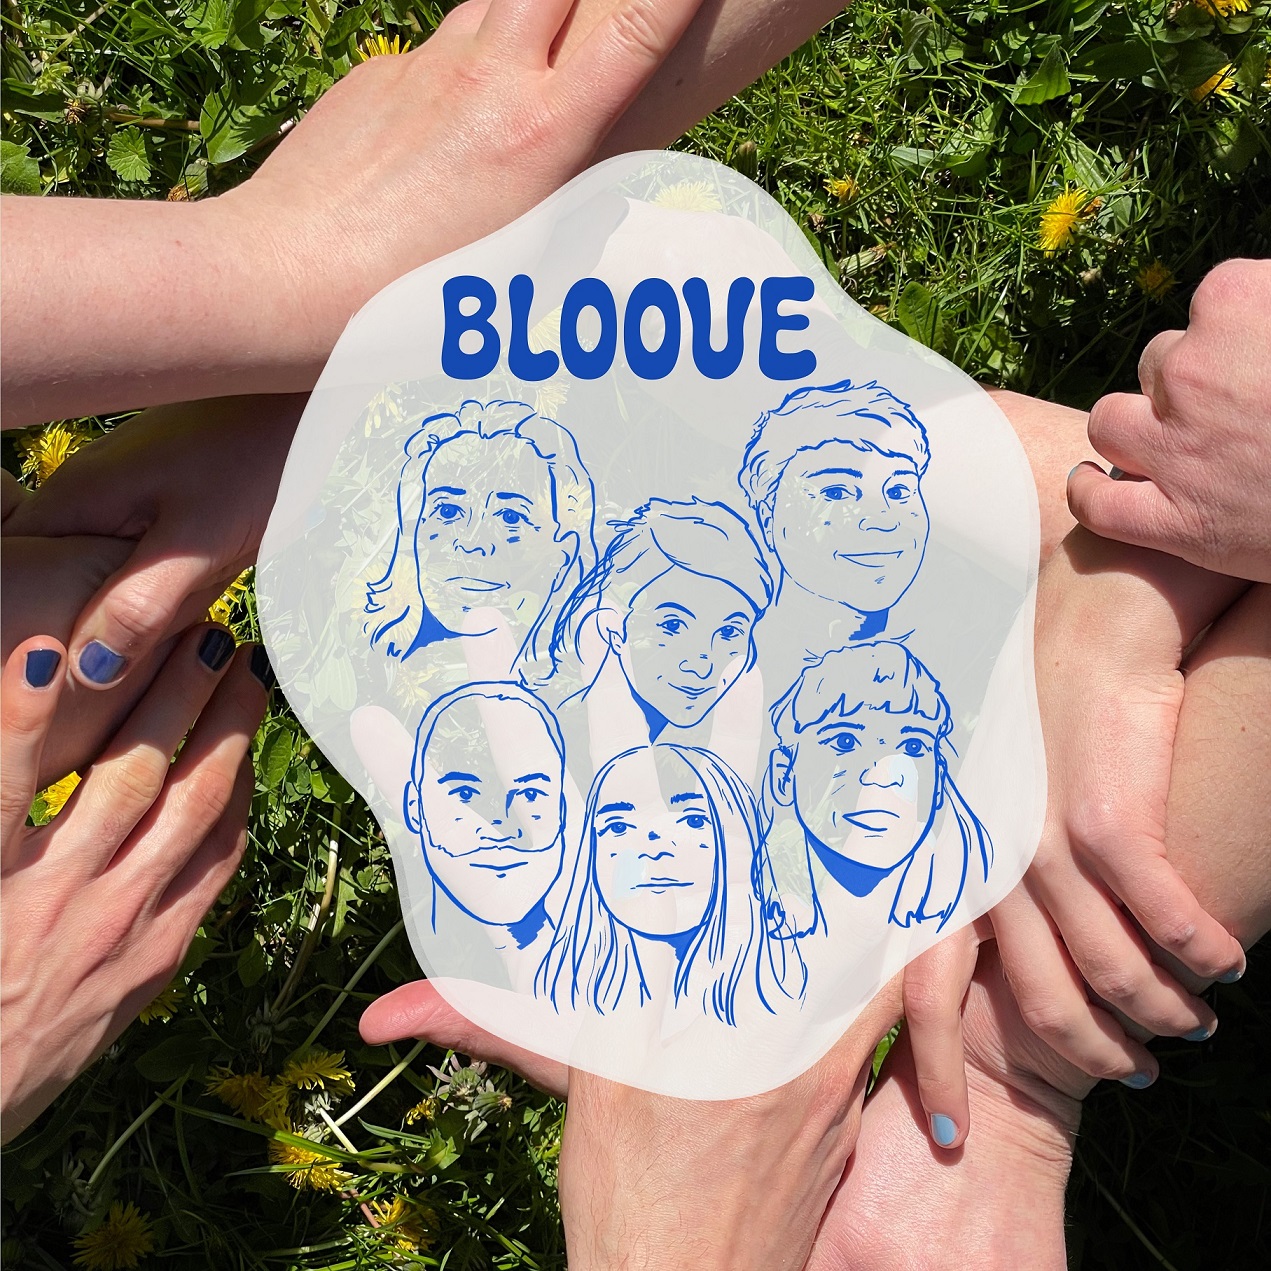 Postcard: 6 faces drawn in blue and the title "BLOOVE"; background is meadow and some hands with blue nail polish